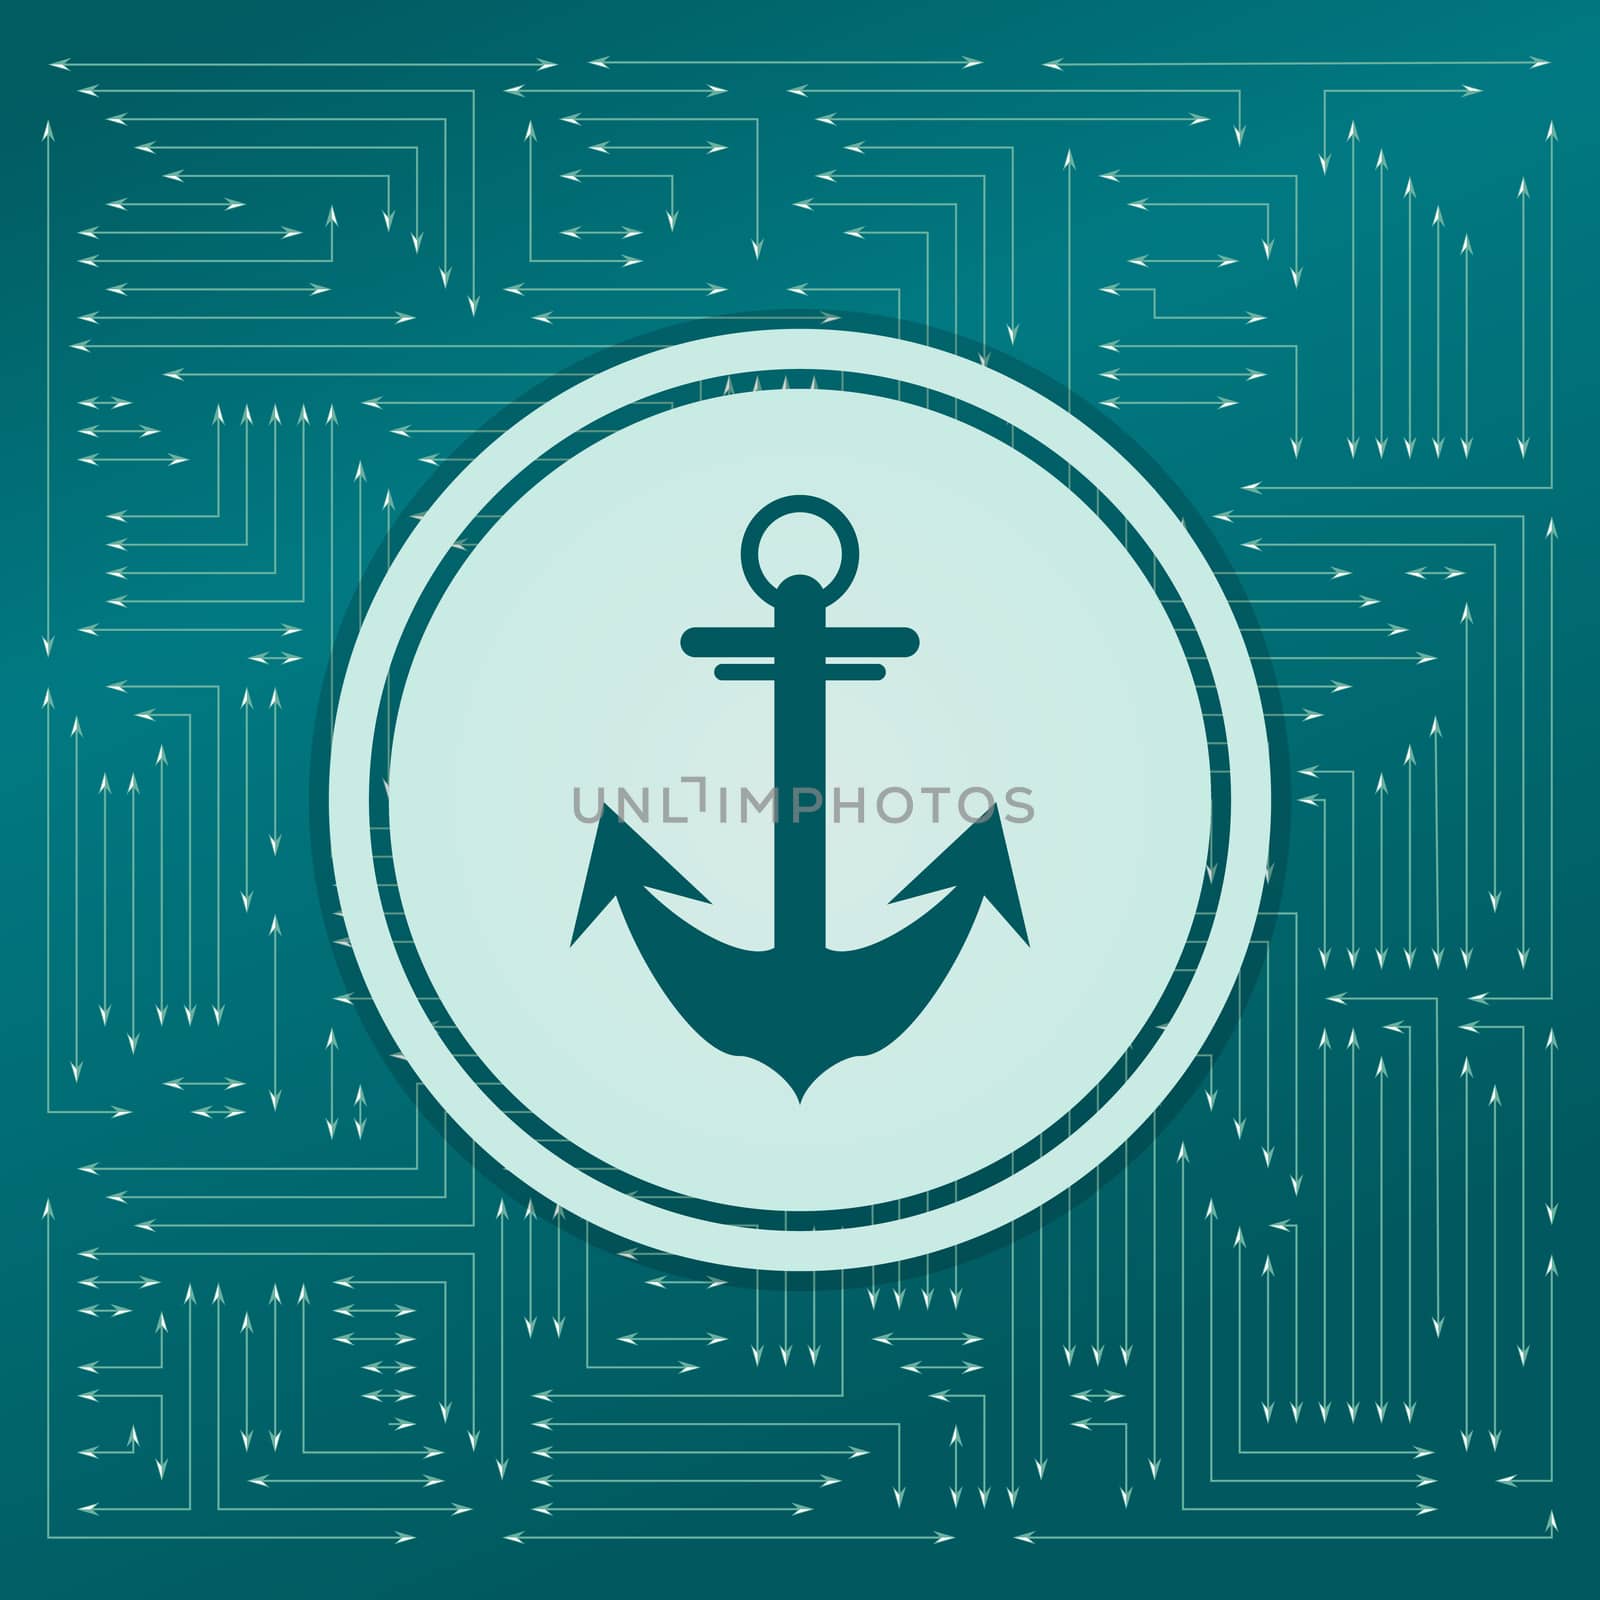 Anchor icon on a green background, with arrows in different directions. It appears on the electronic board. illustration